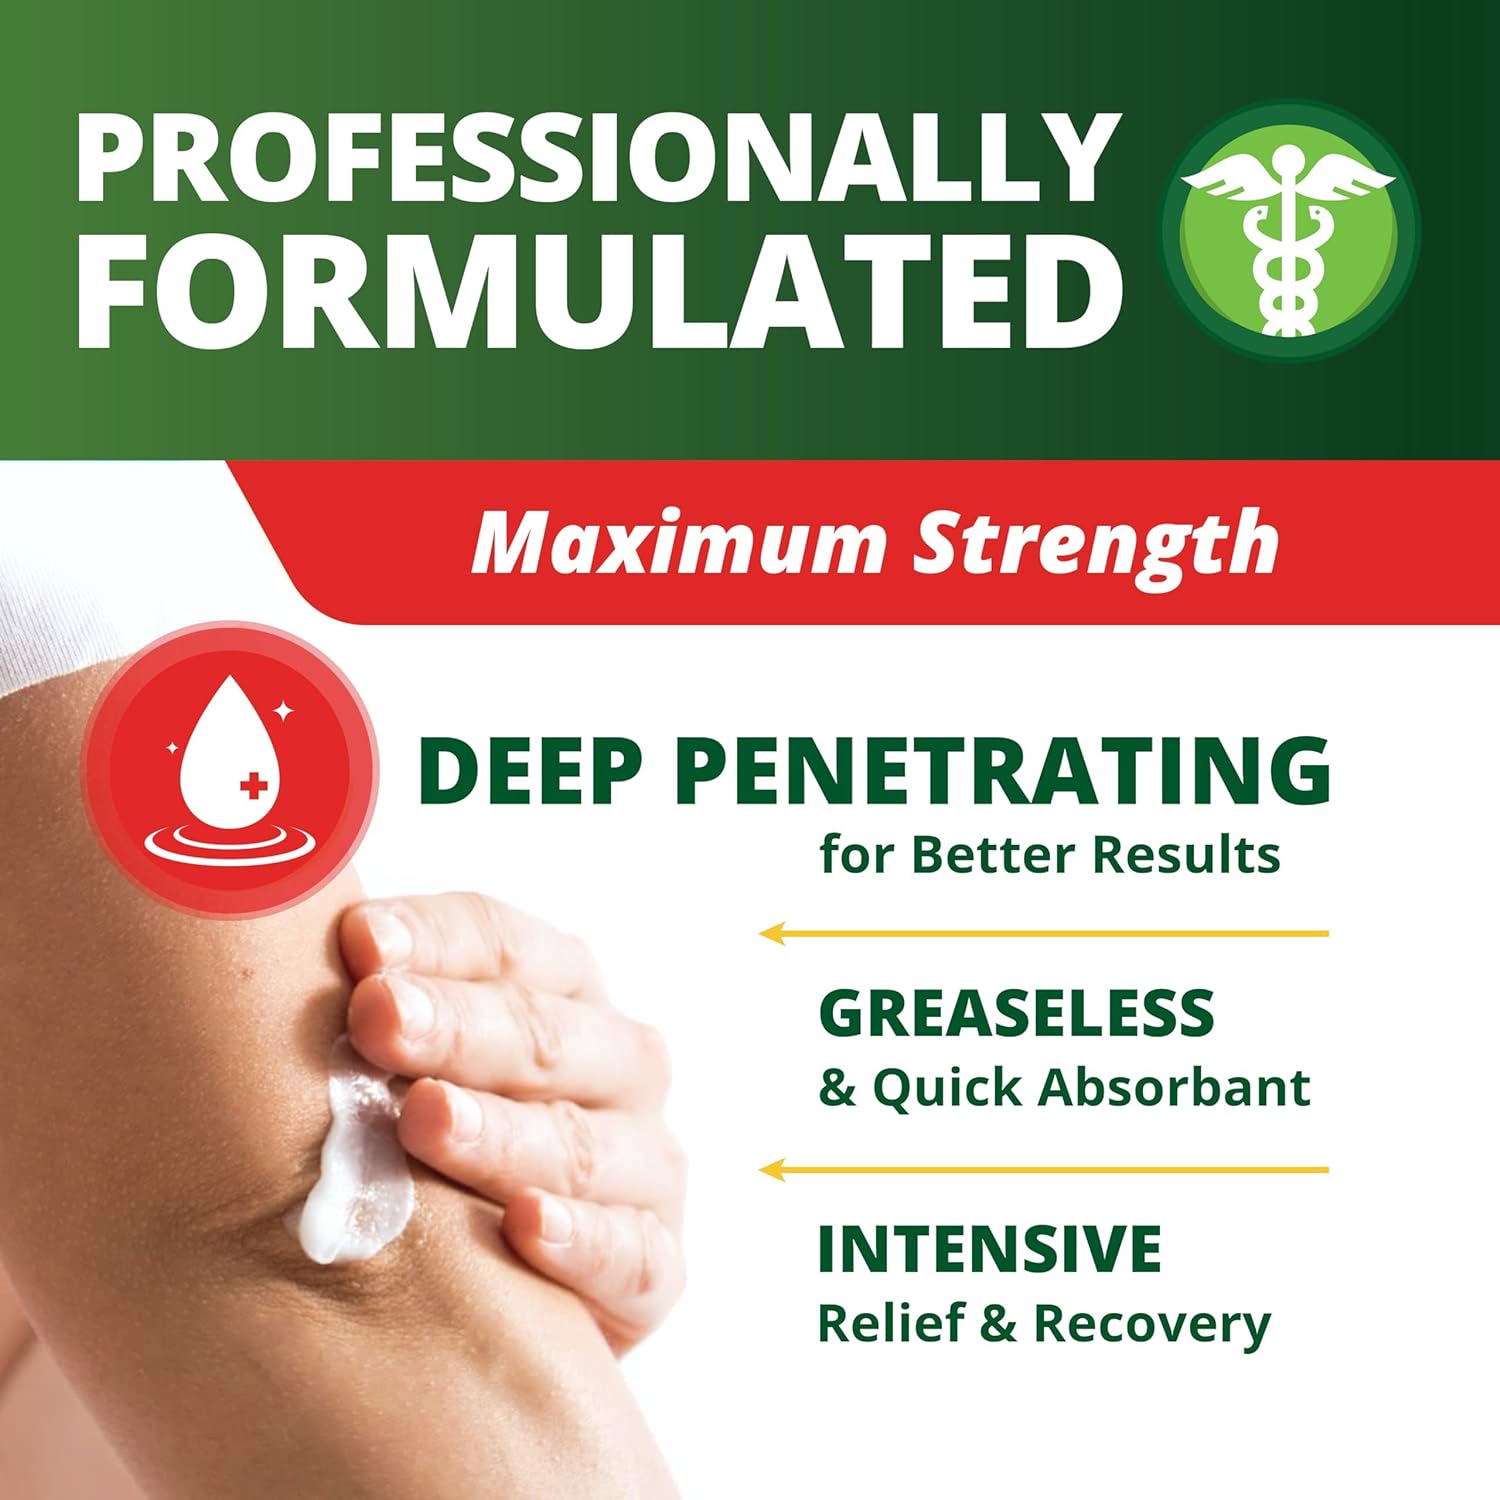 OWELL Naturals Arthritis Pain Relief Cream 7 oz, Maximum Strength Deep Penetrating Relieving for Aches, Neuropathy, Joint, Muscle, Back, Knee, Feet, Hand, Ankle, Restless Legs, Shoulder : Health & Household